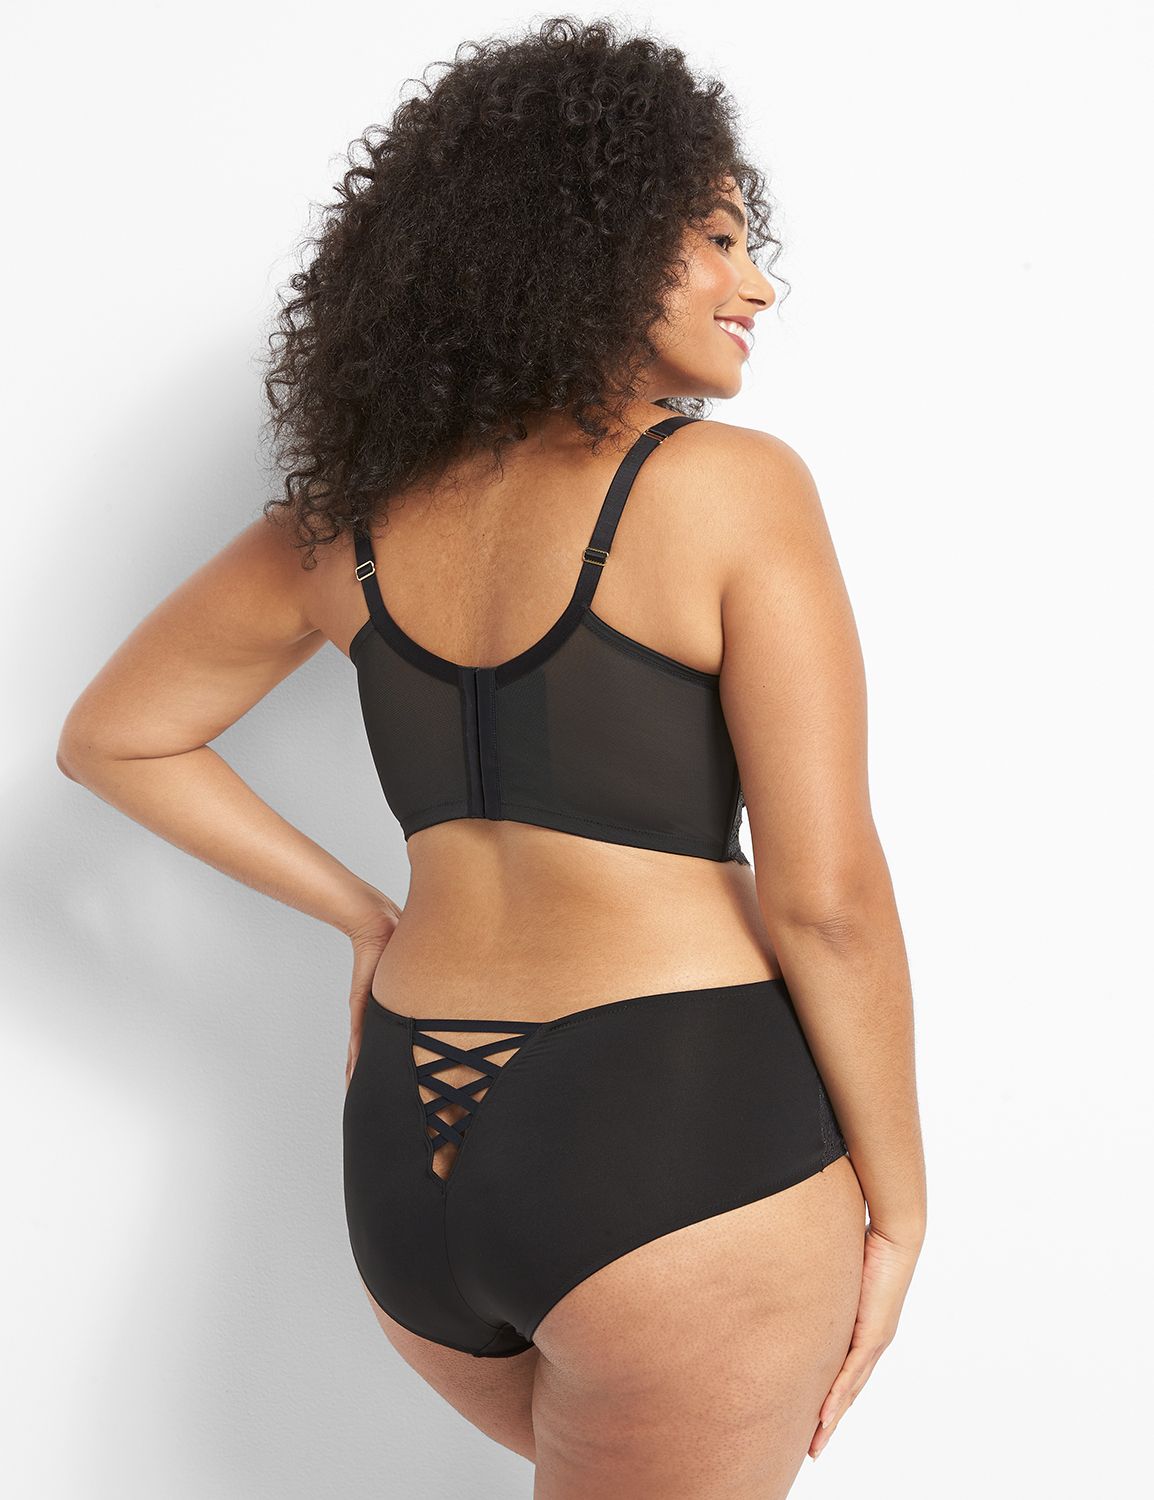 Cacique Lightly French Balconette Black Lace Long Line Underwired